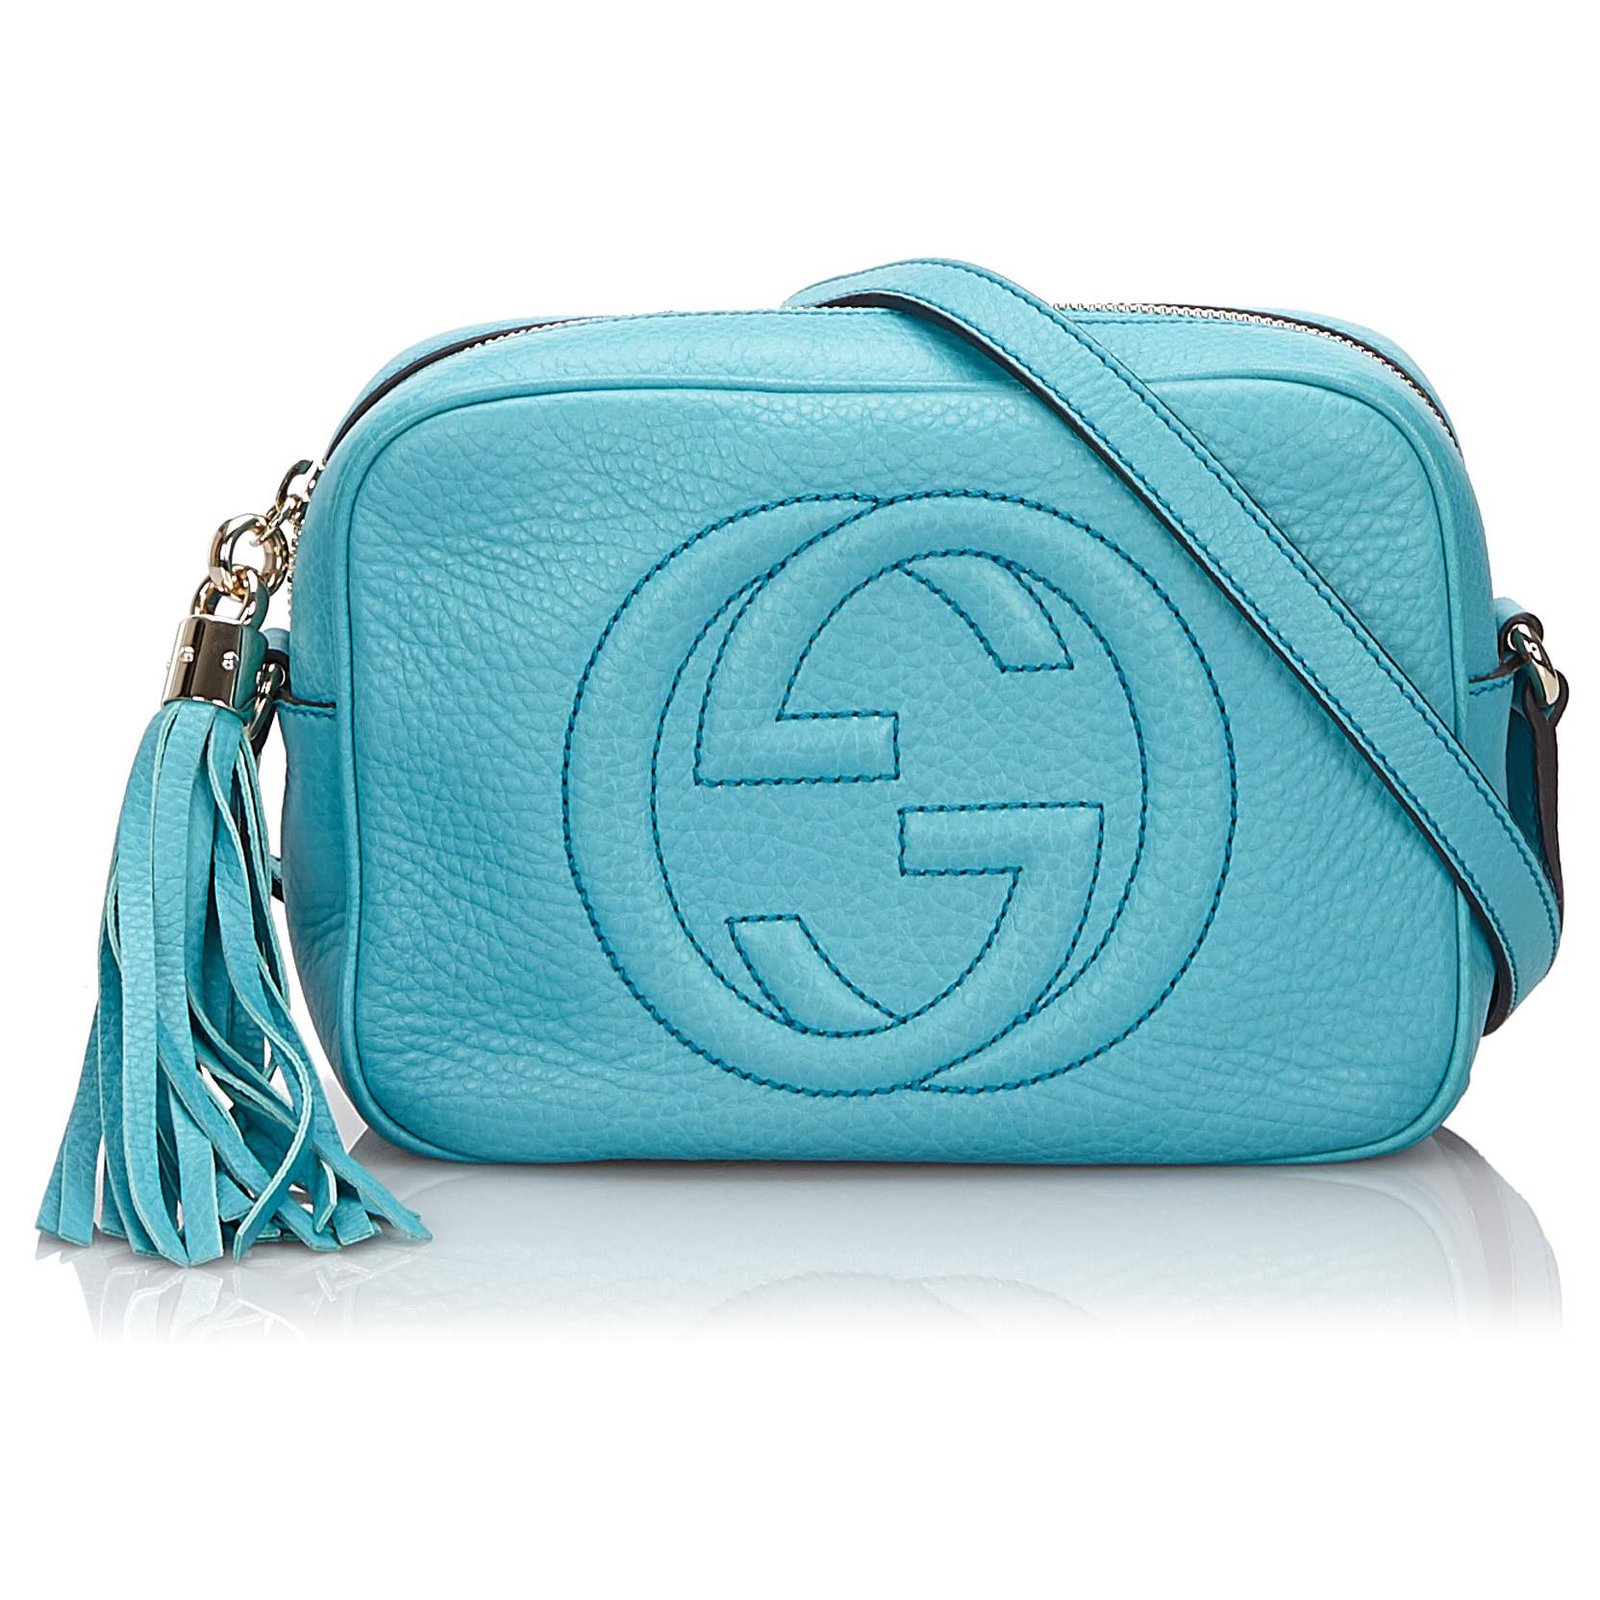 gucci blue leather bag